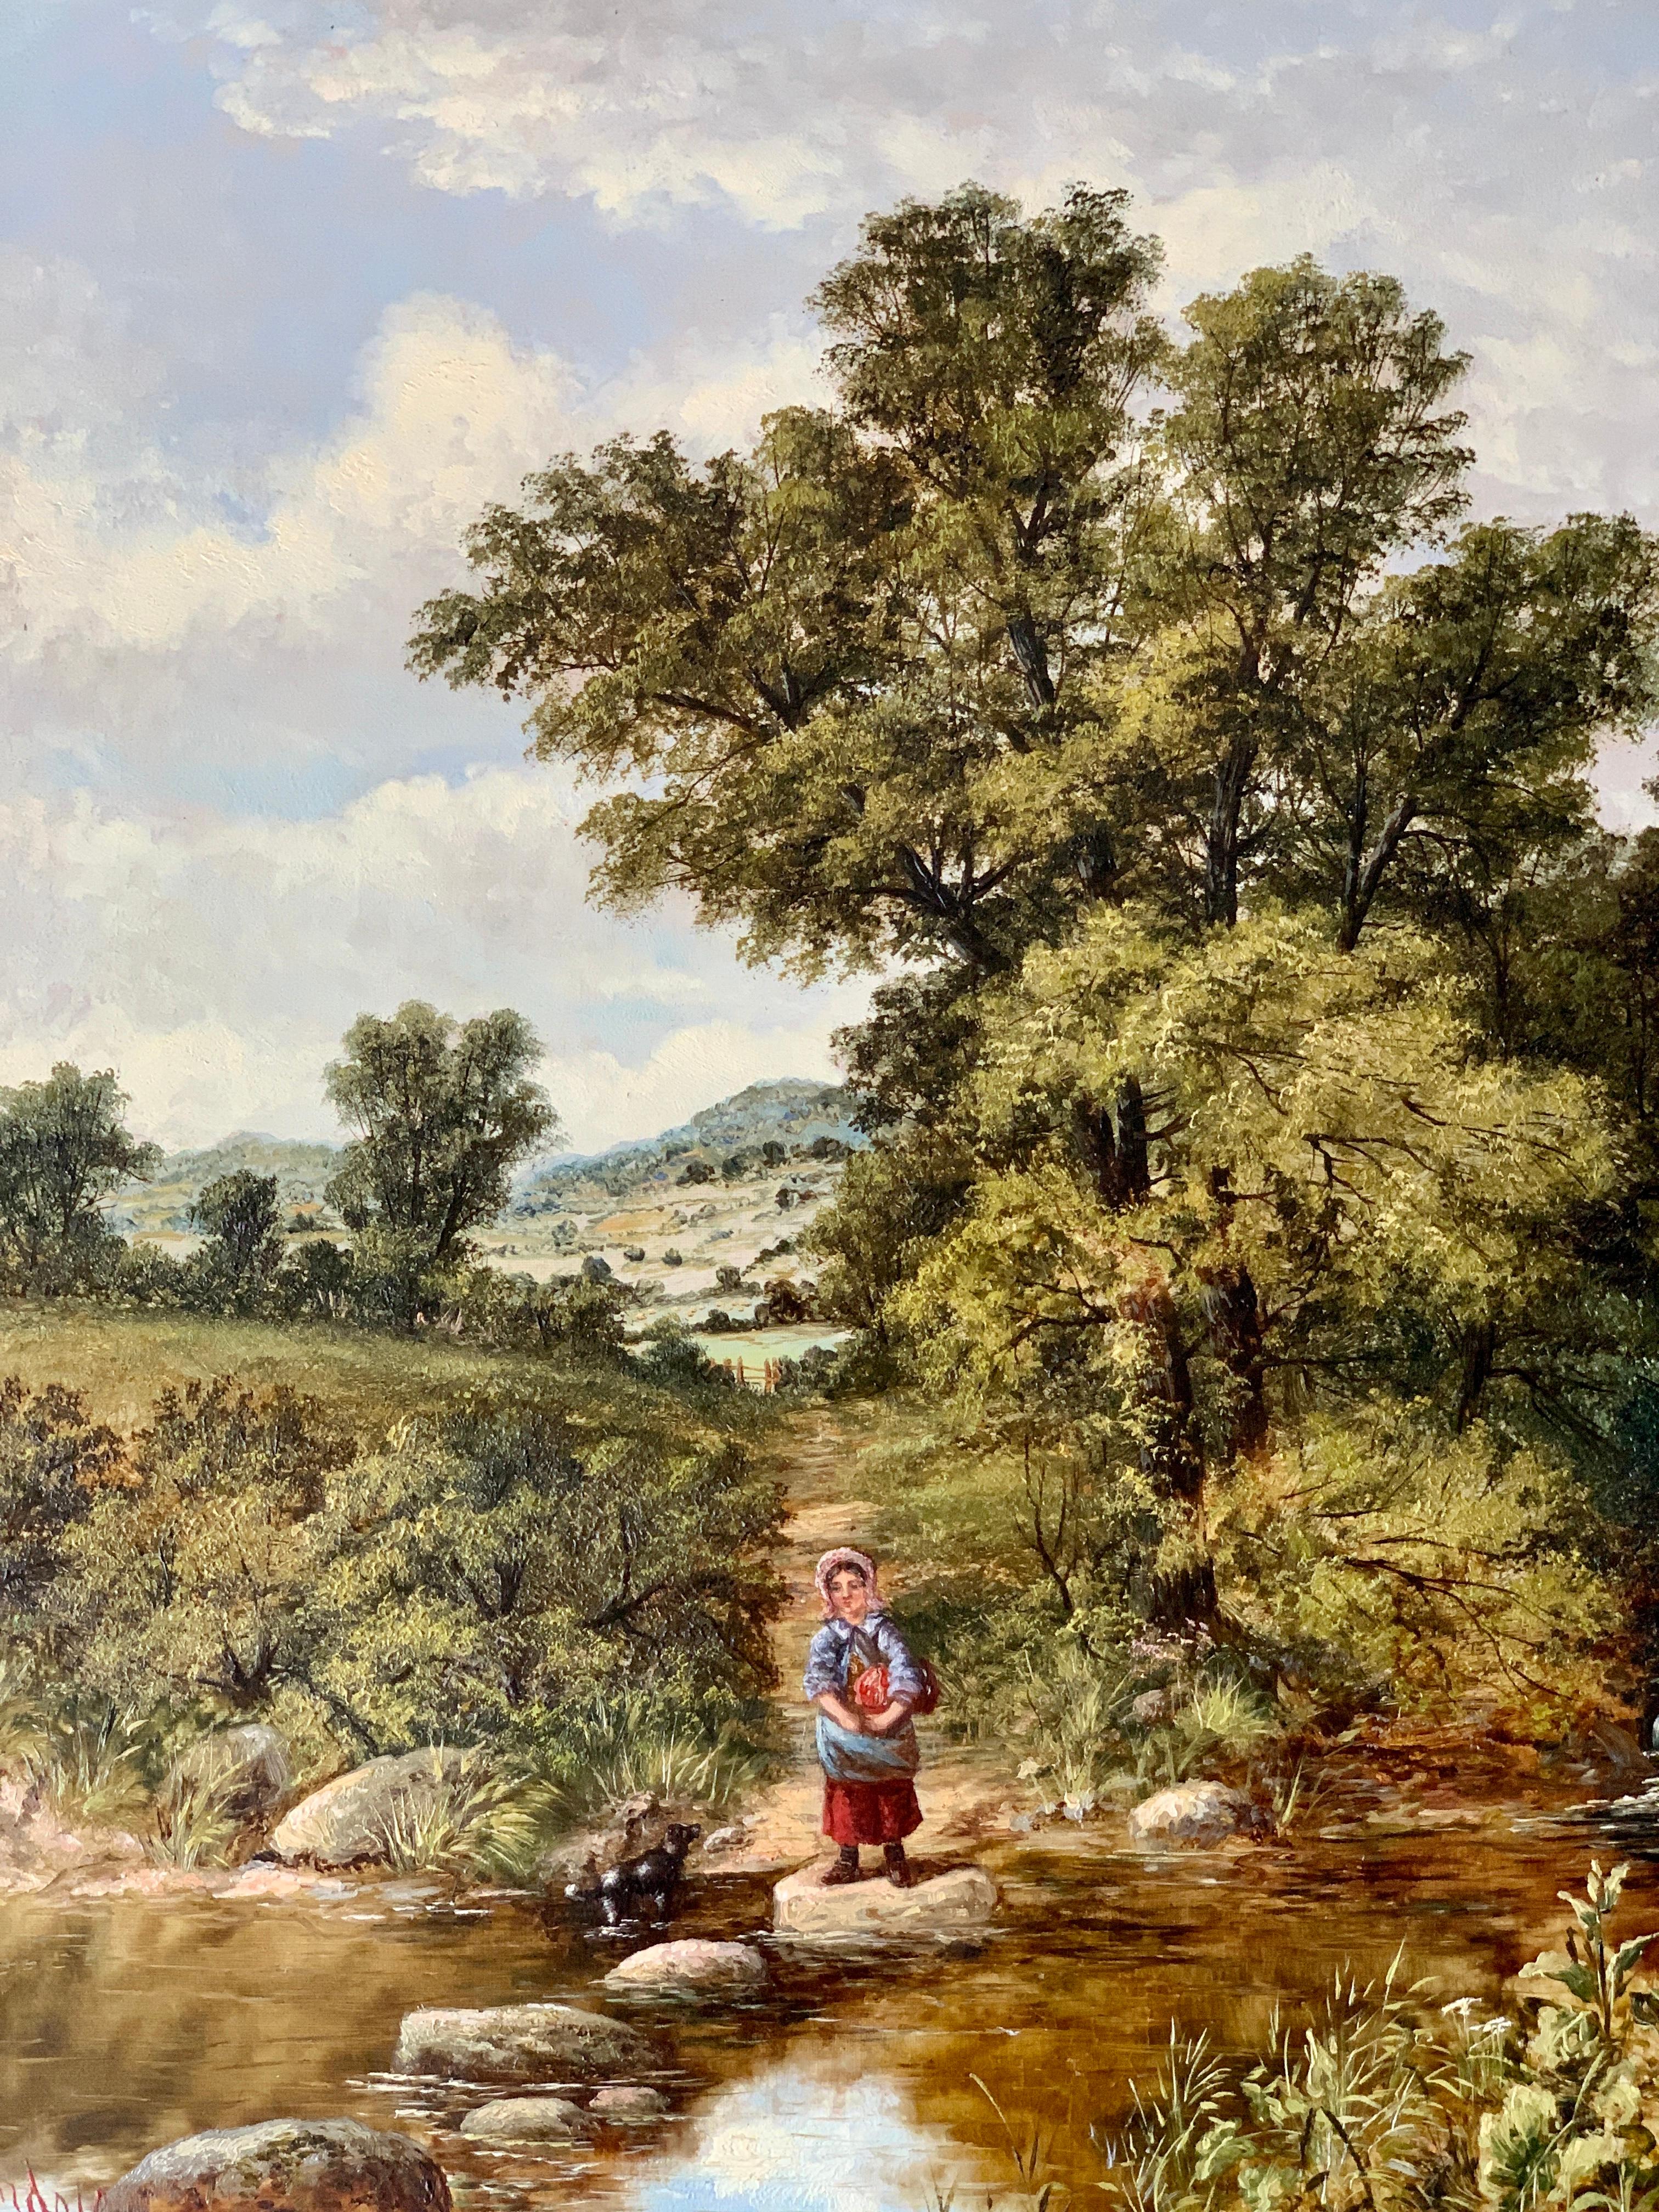 19th century English landscape with a woman crossing a river on stepping stones - Painting by Unknown